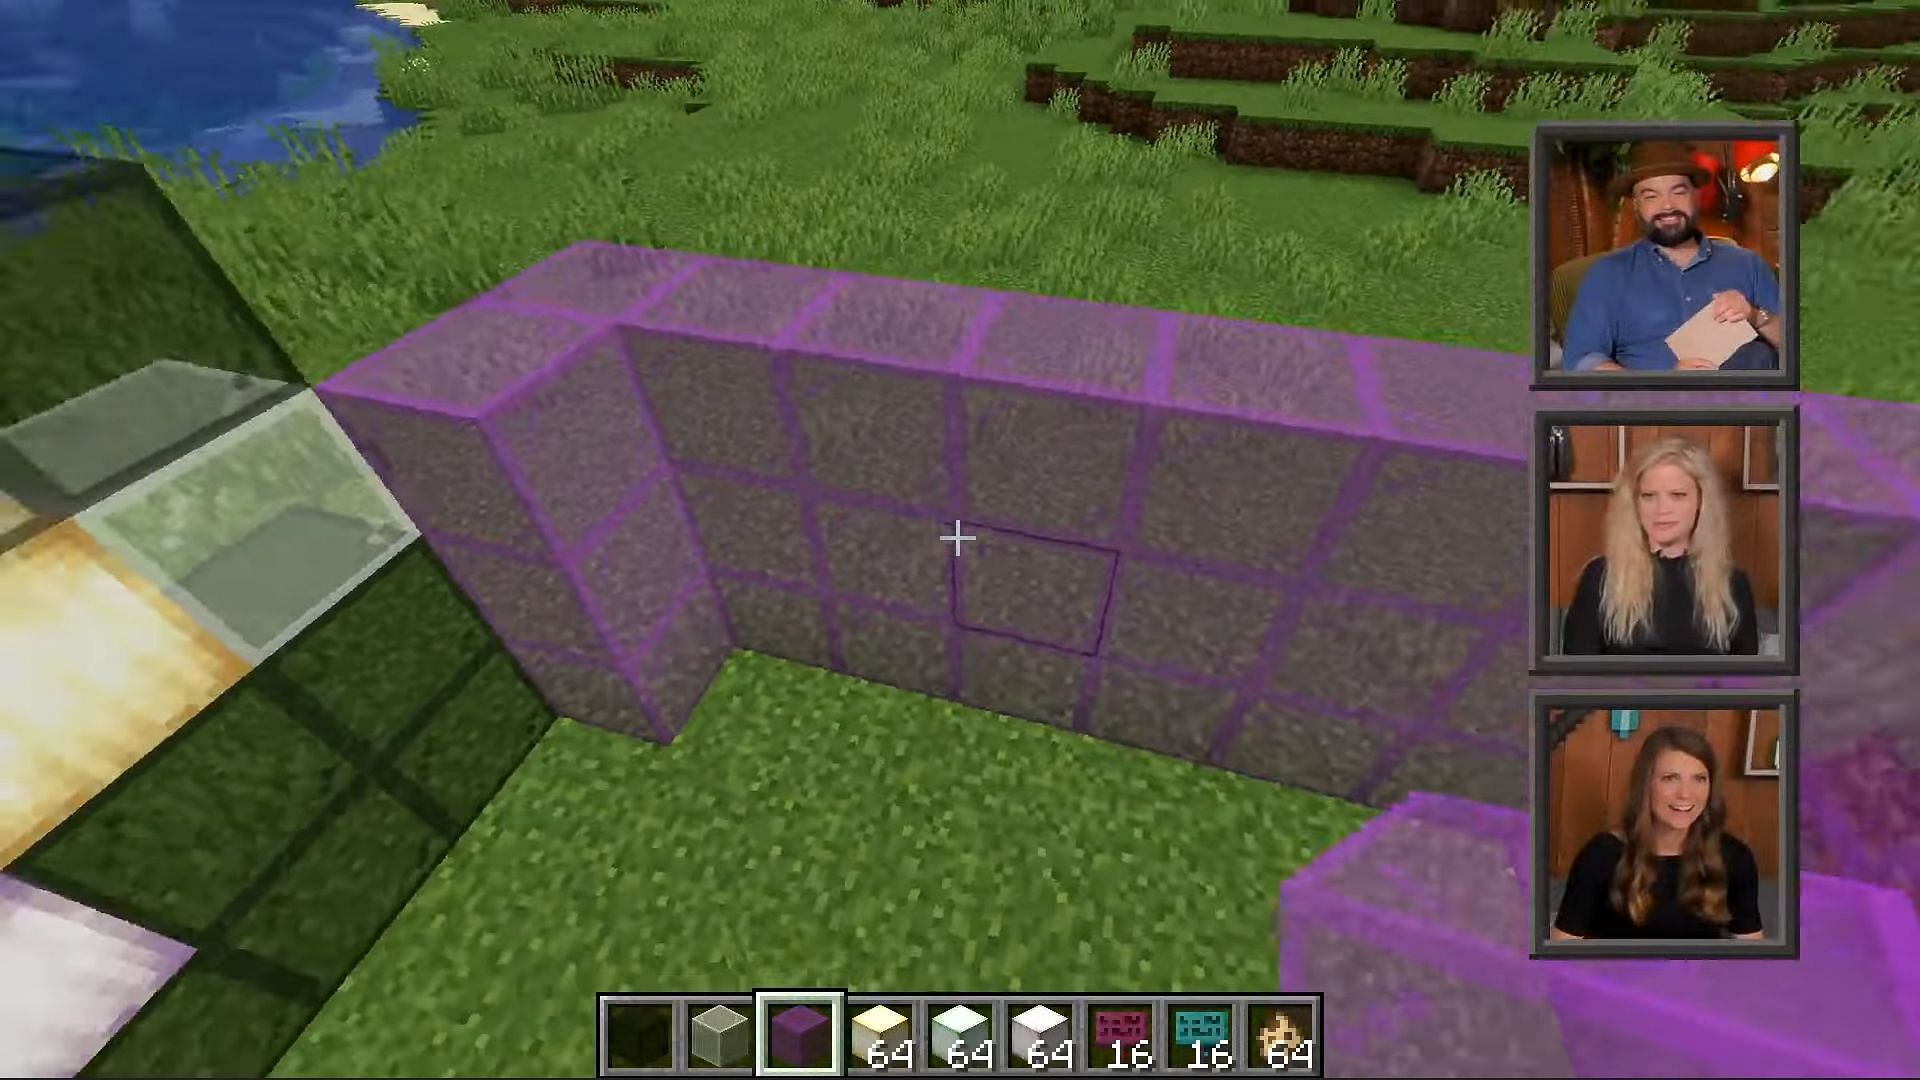 During a recent live stream, Agnes Larsson talked about the upcoming live event taking place on October 15 (Image via YouTube/Minecraft)